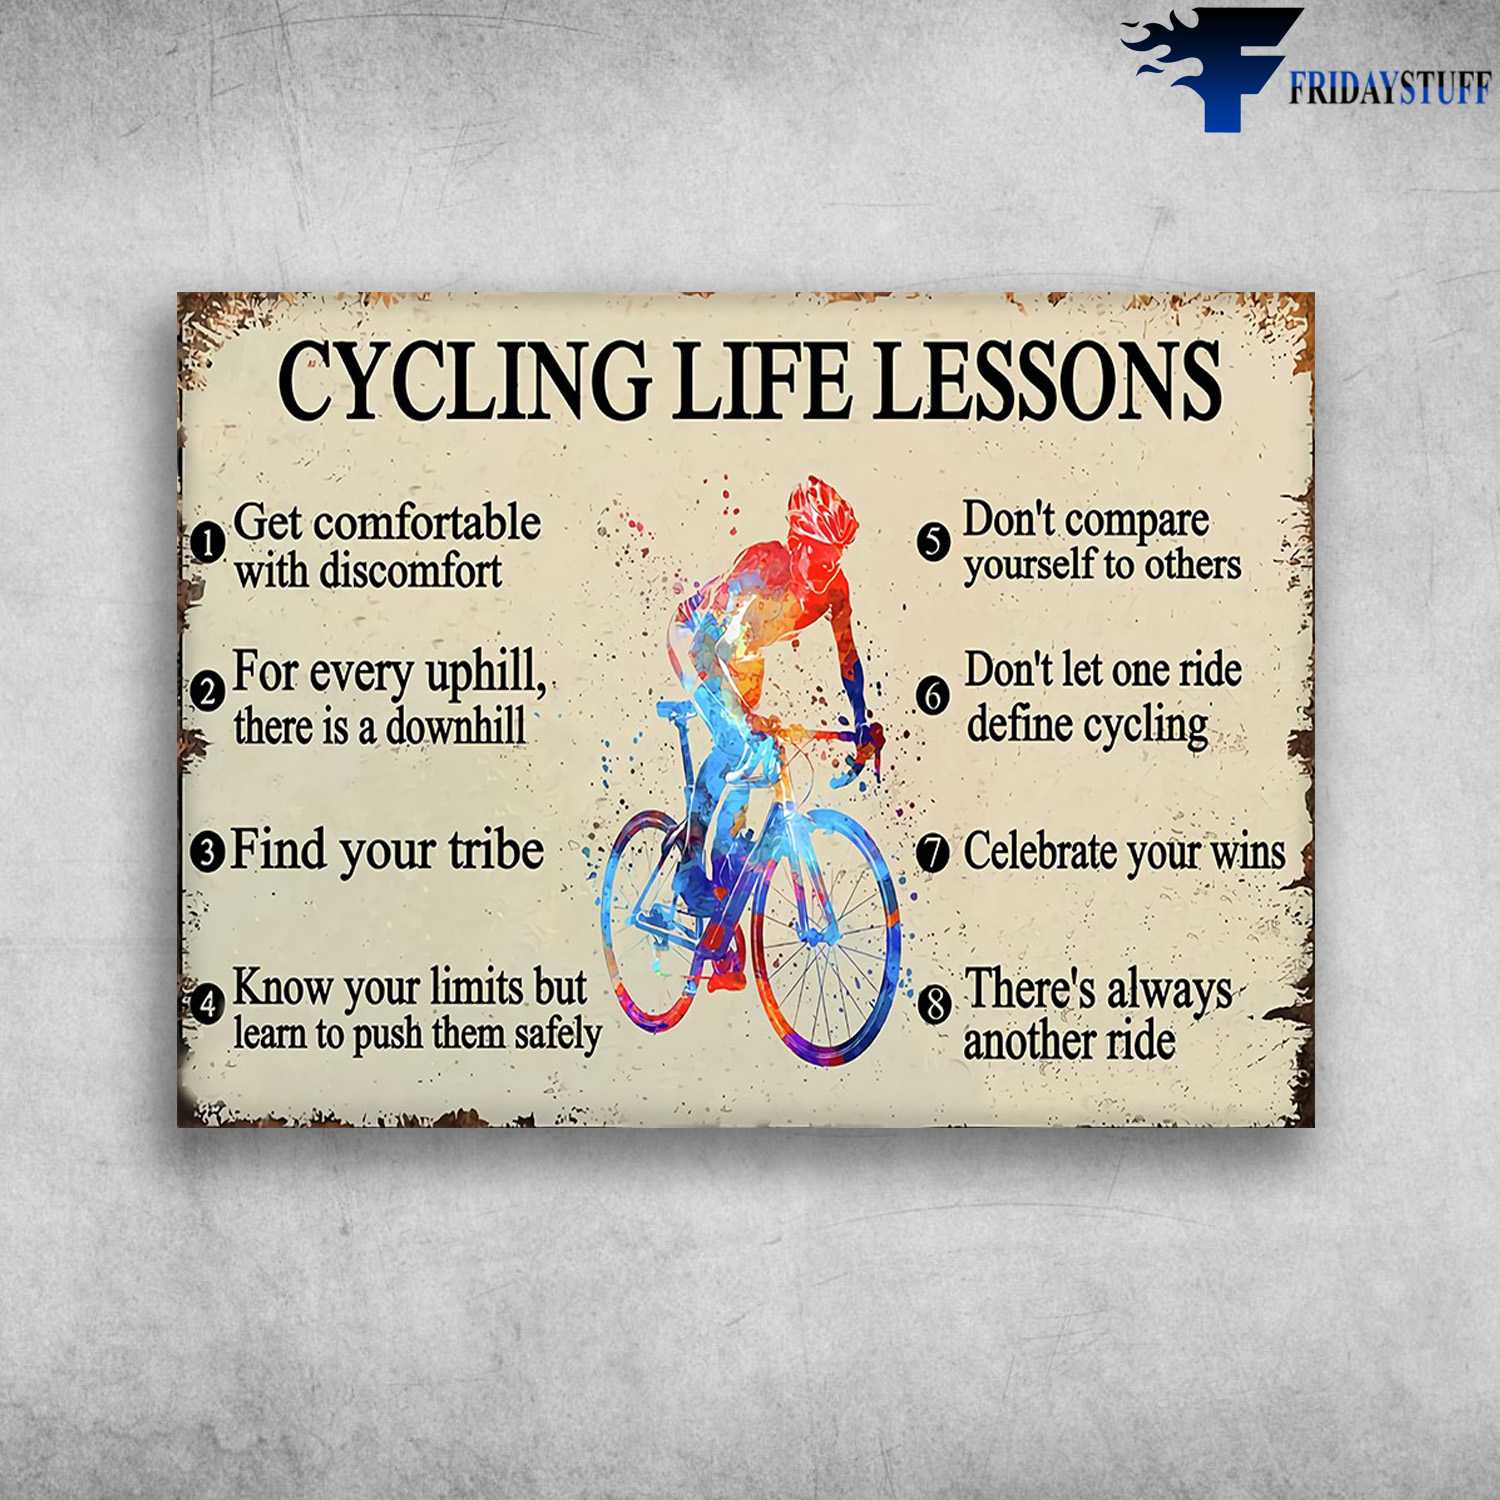 Biker Lover, Cycling Life Lesson - Get Comfortable With Discomfort, For Every Uphill, There Is A Downhill, Find Your Tribe, Know Your Limits But Learn To Push Them Safely, Don't Compare Yourself To Other